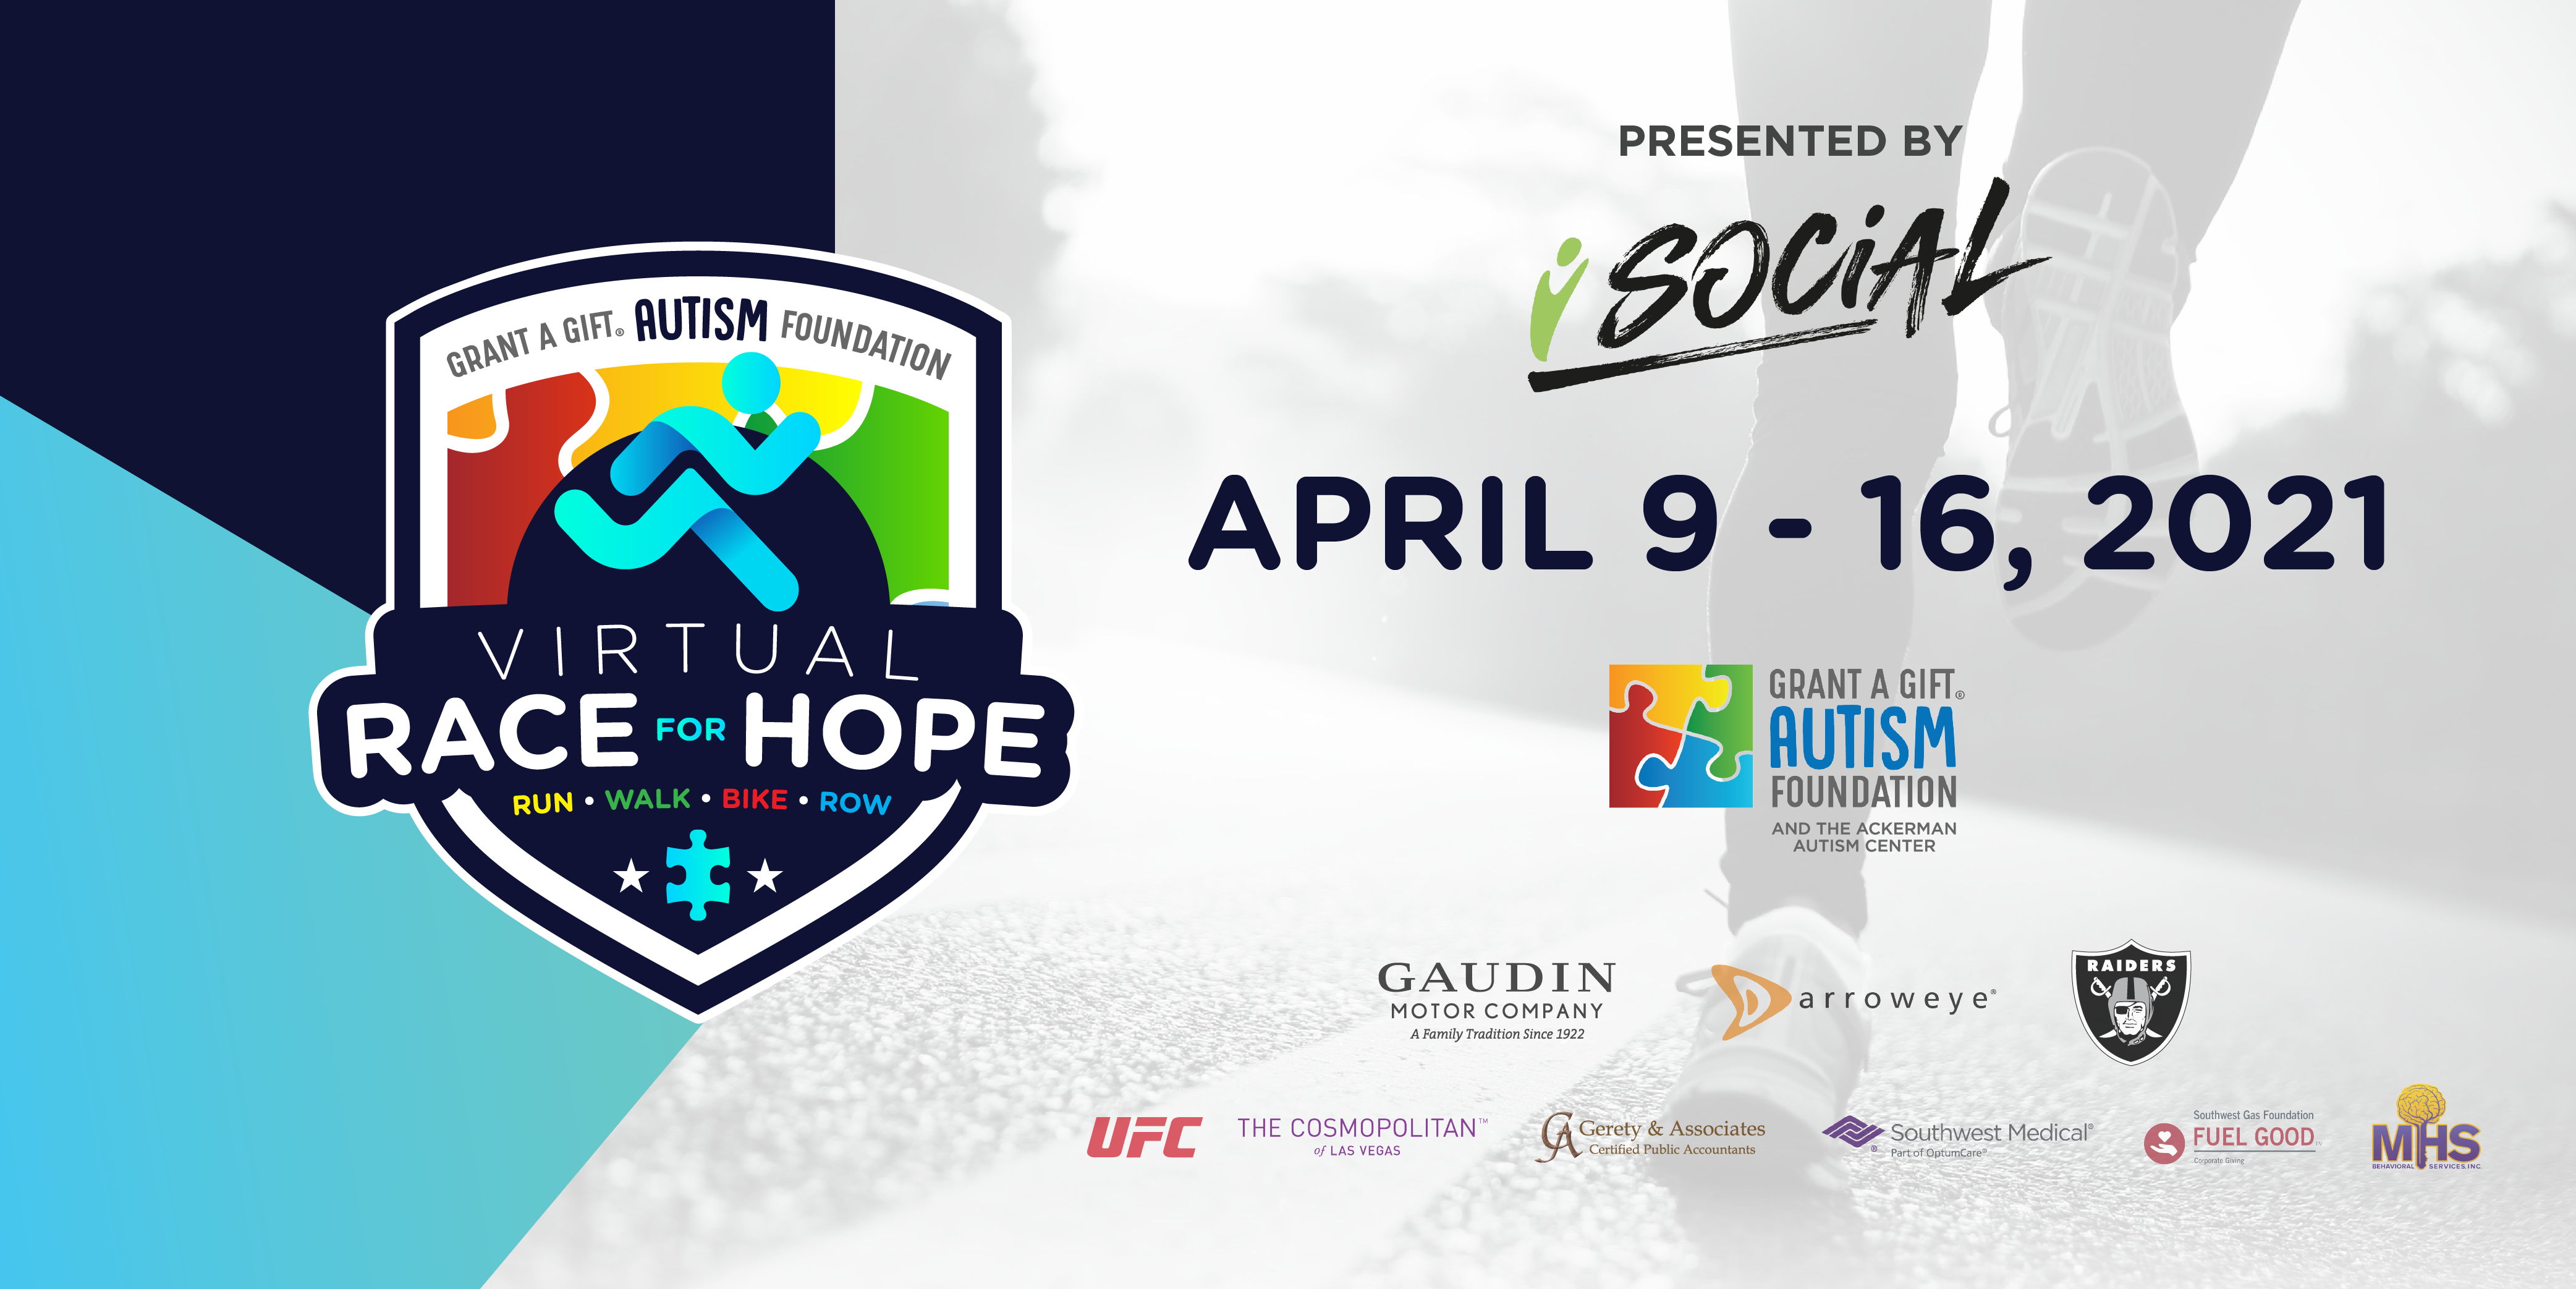 Virtual Race for Hope 5k 12th Annual Campaign